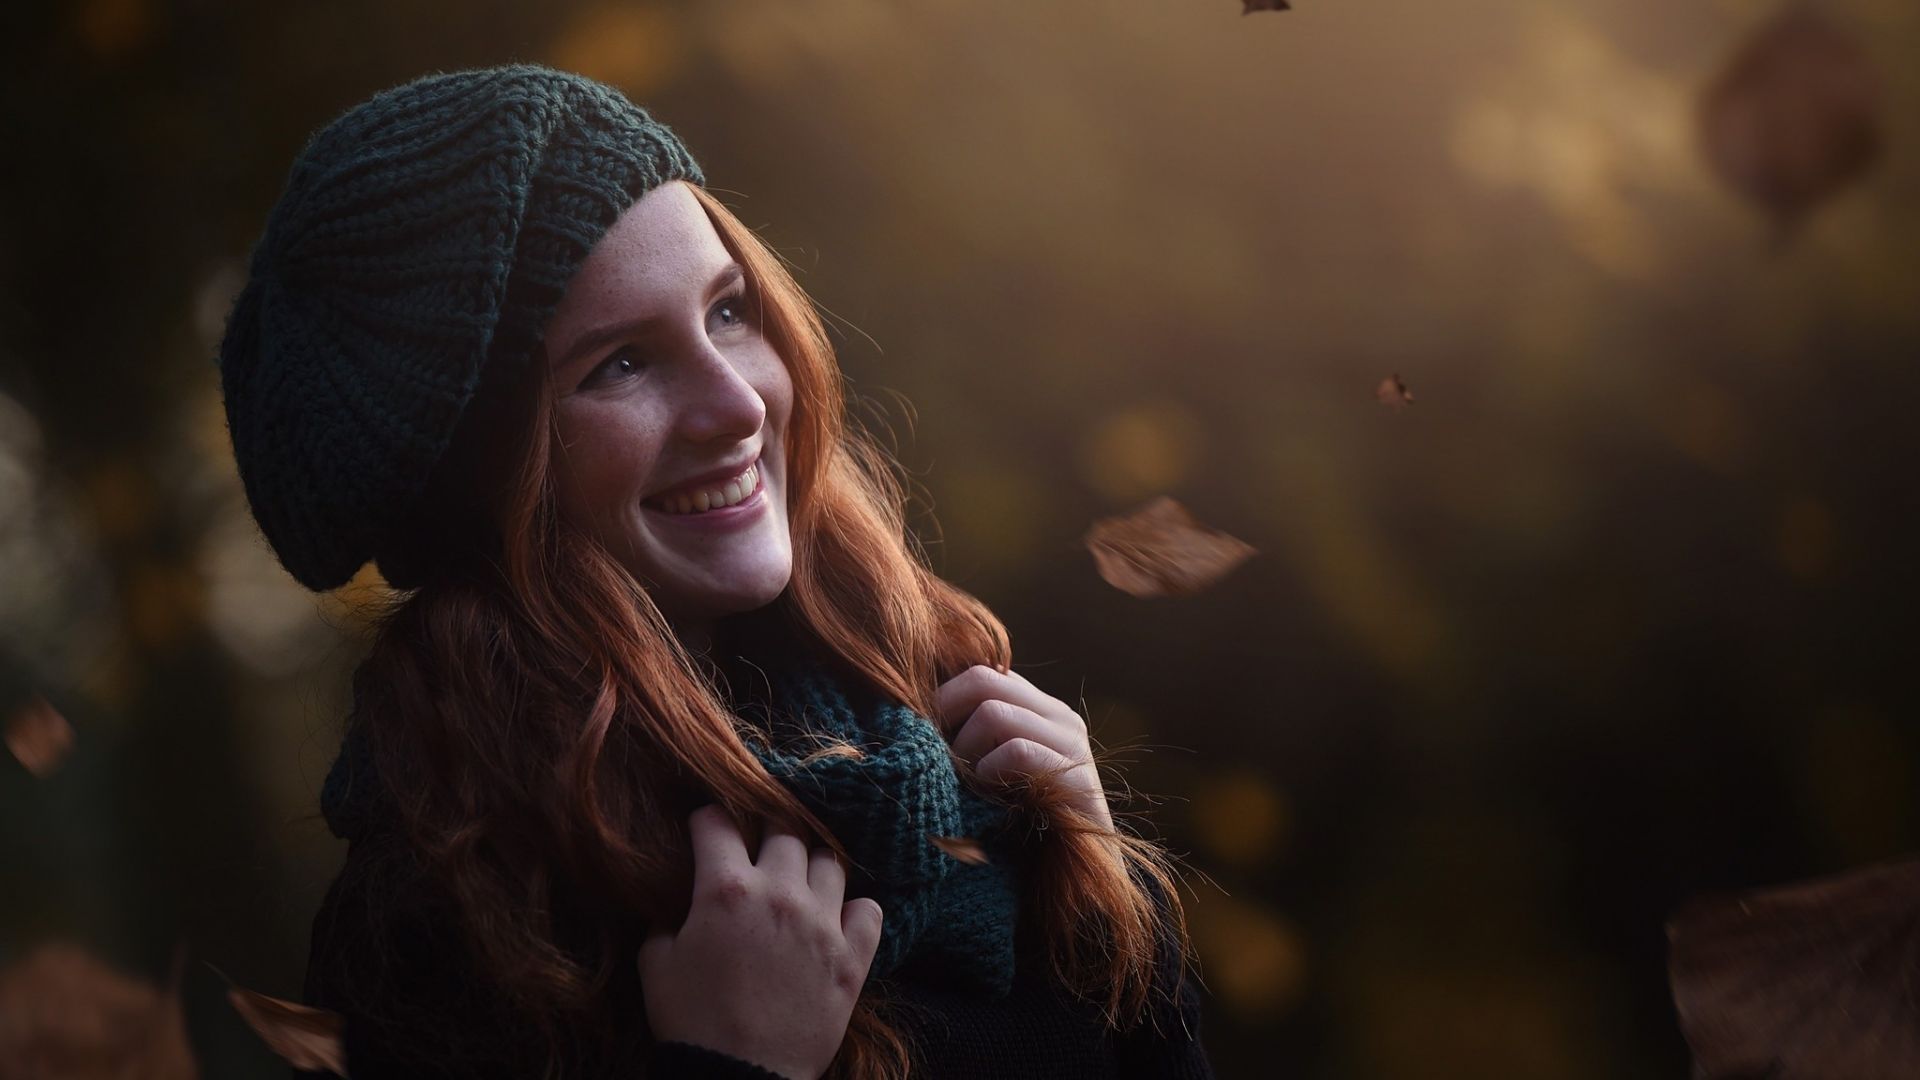 Wallpaper Red head, smiling face, outdoor, fall